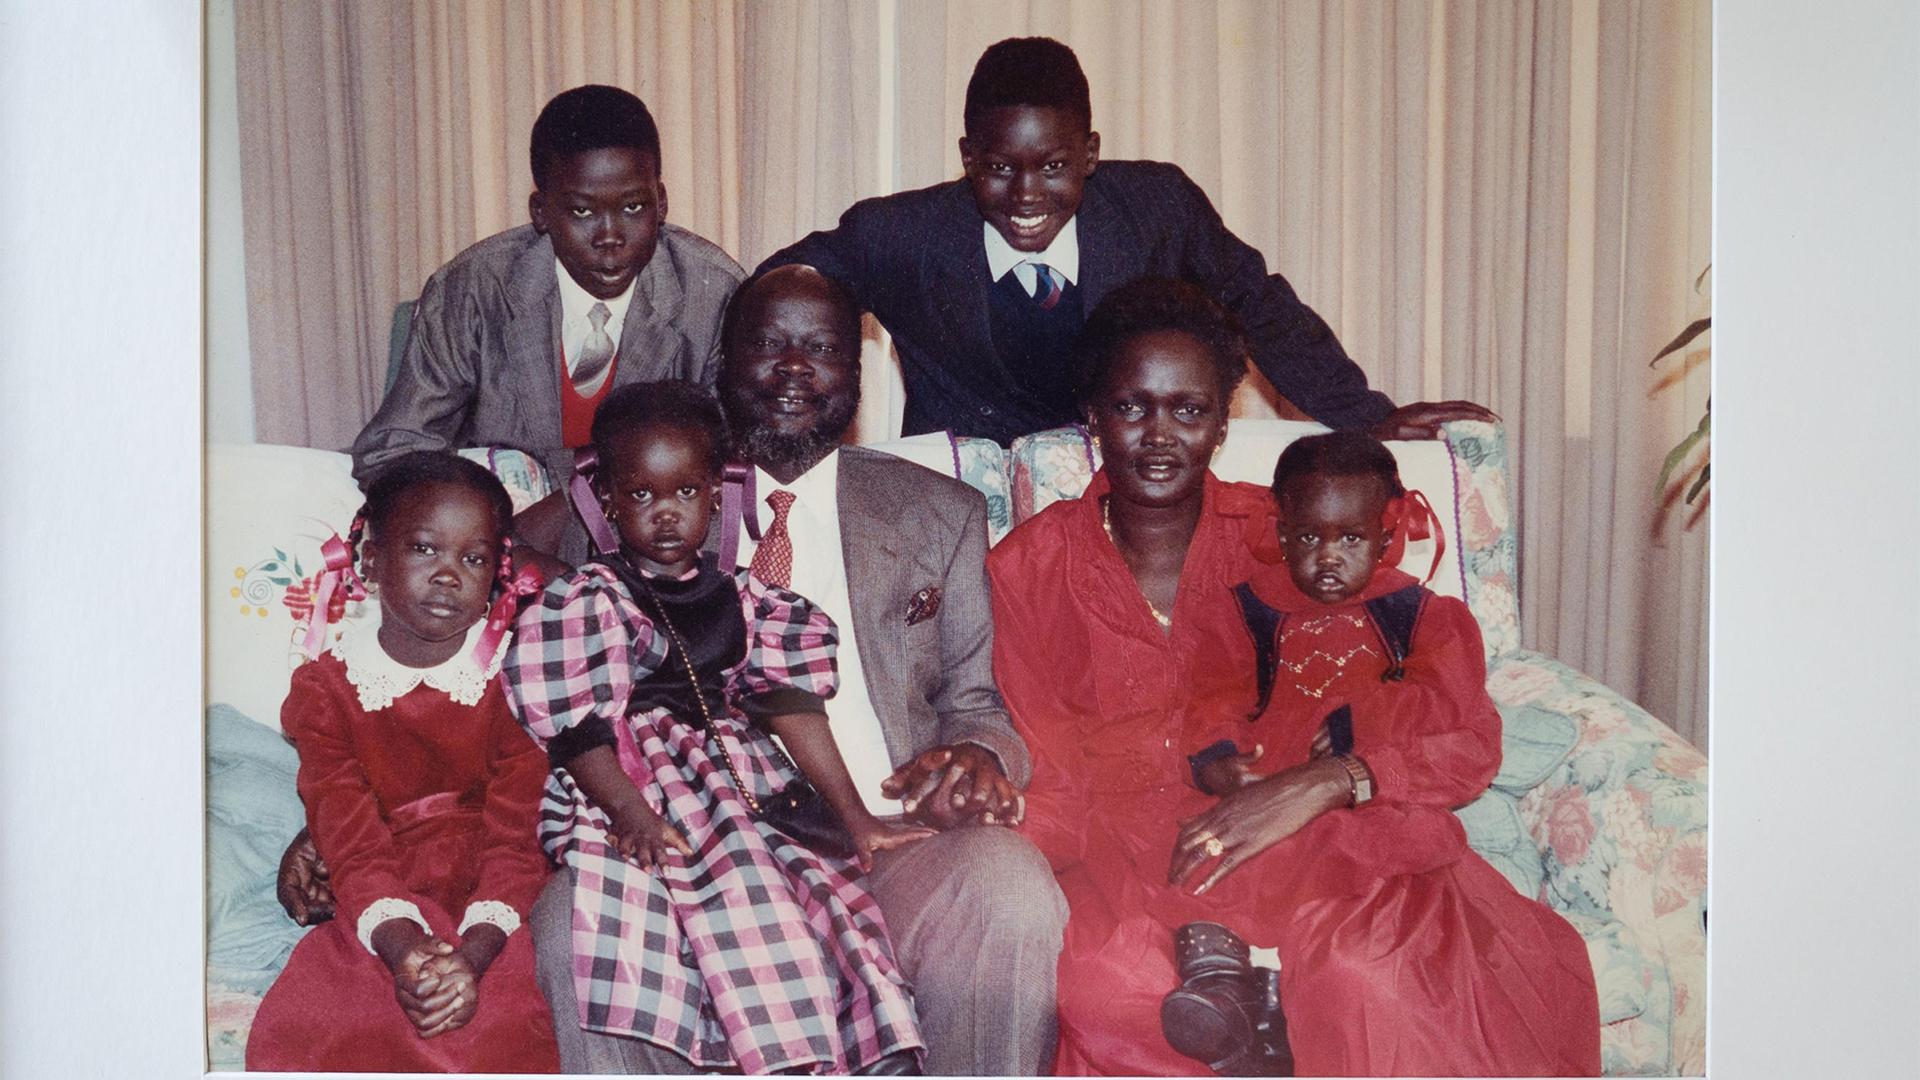 Family portrait of the Mabior family.